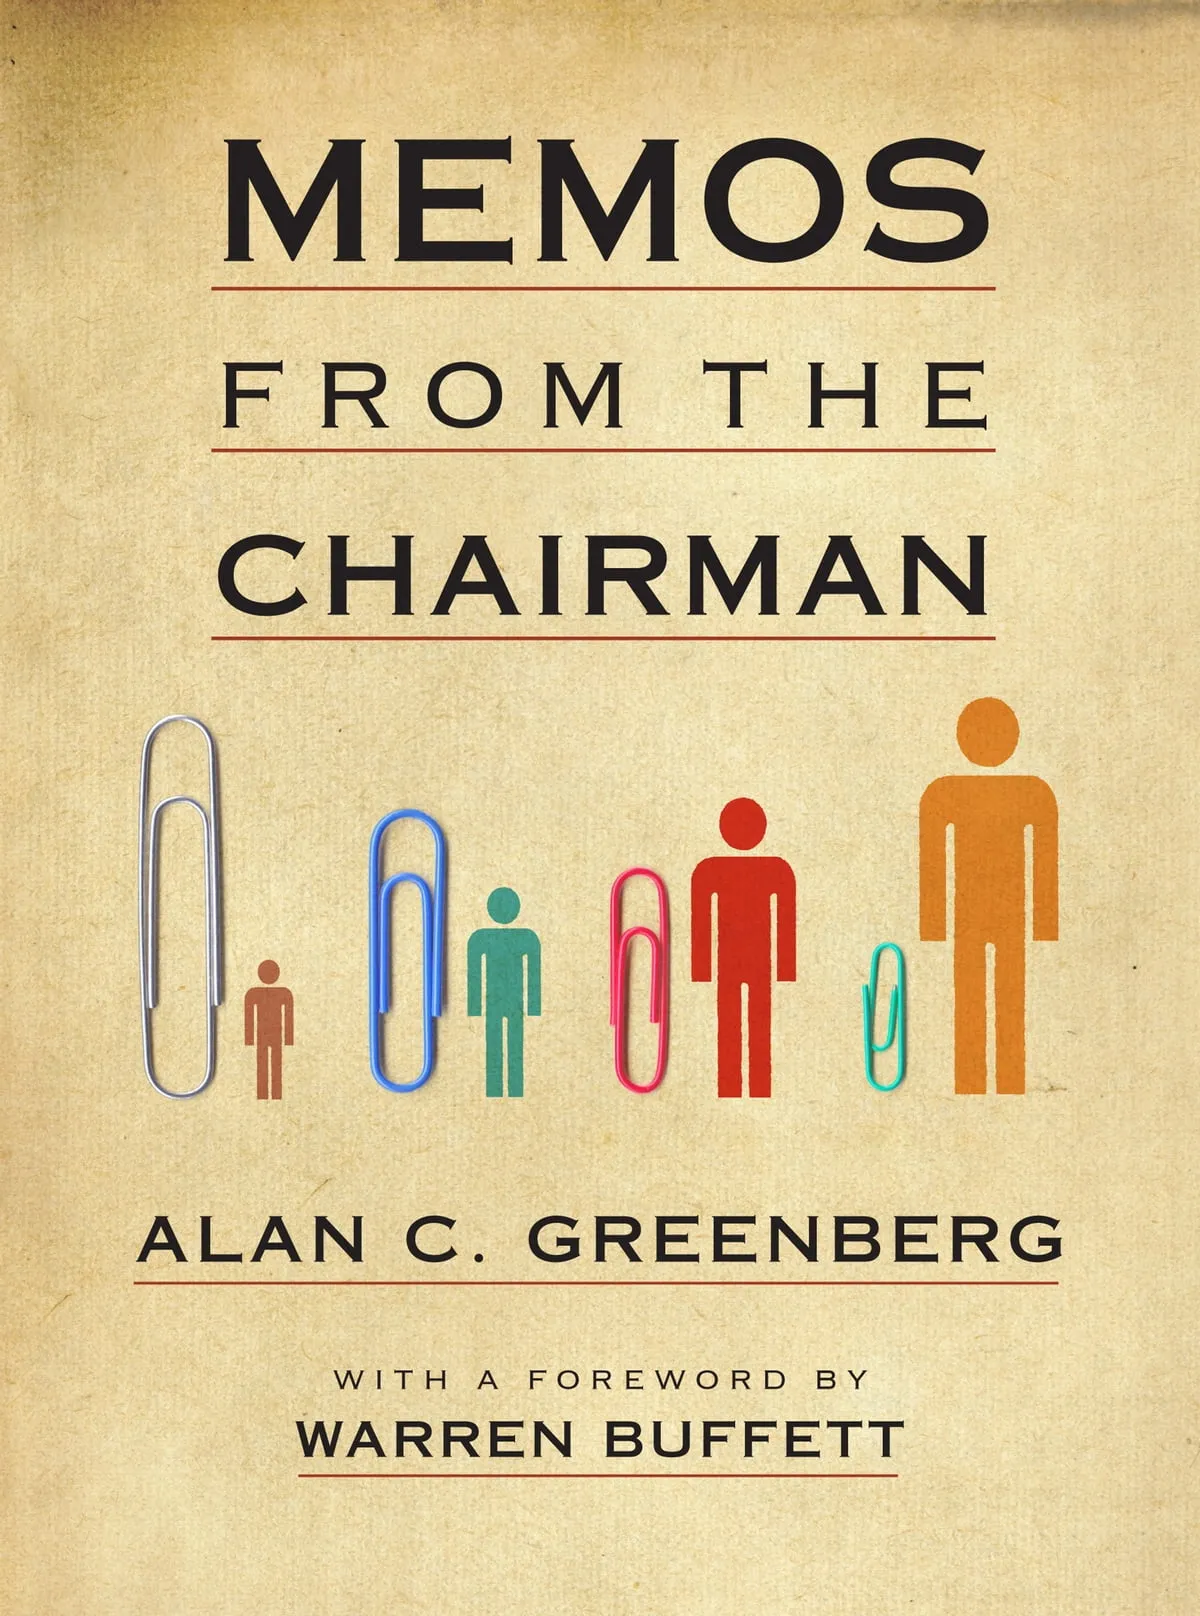 Cover of the book title Memos from the Chairman